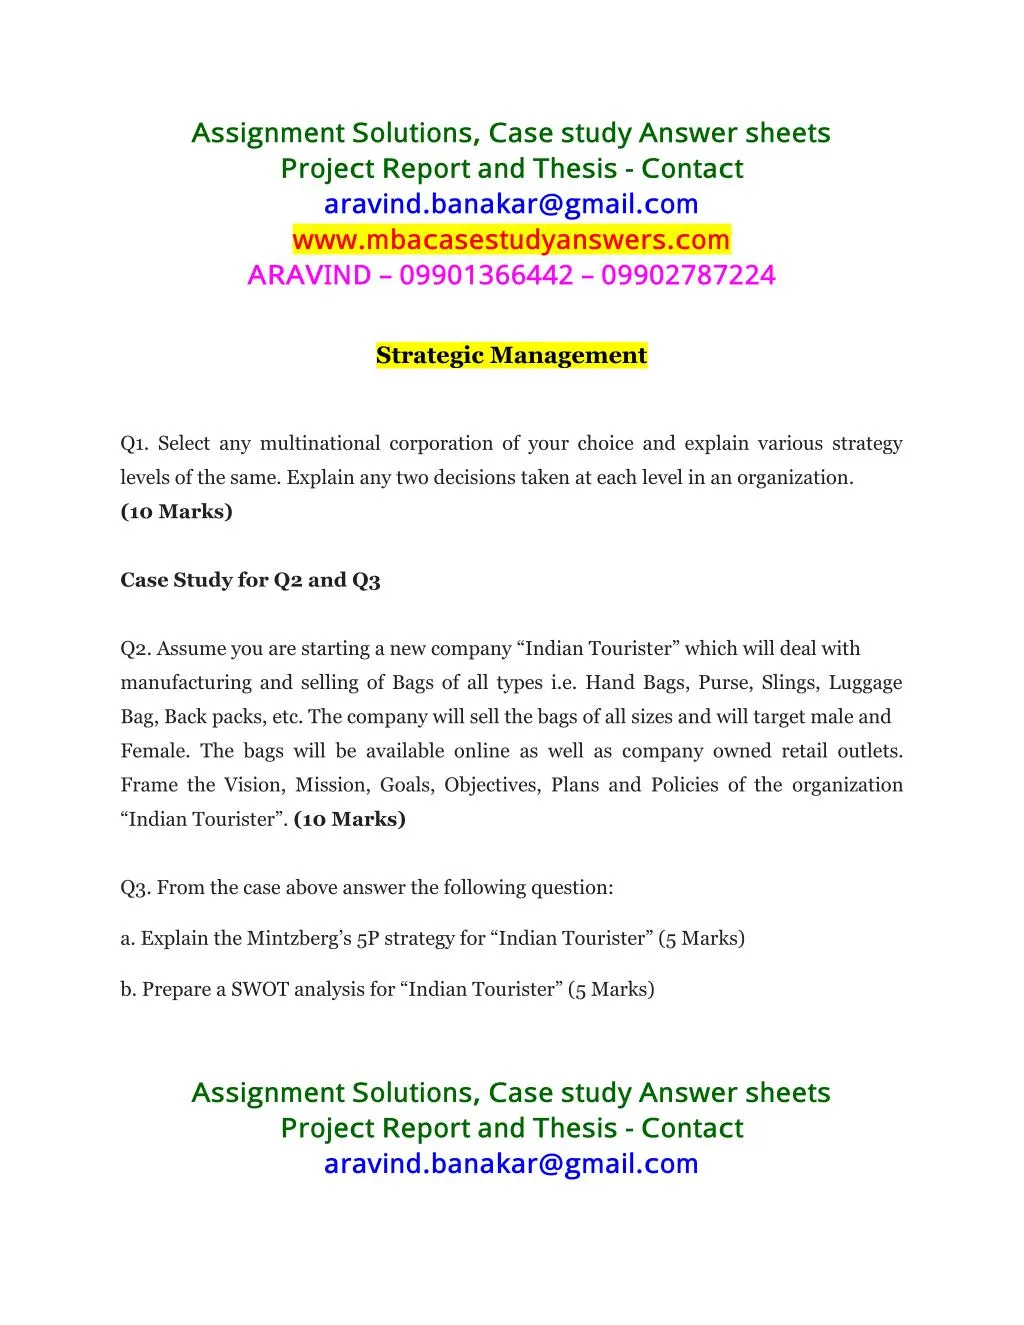 assignment solutions case study answer sheets